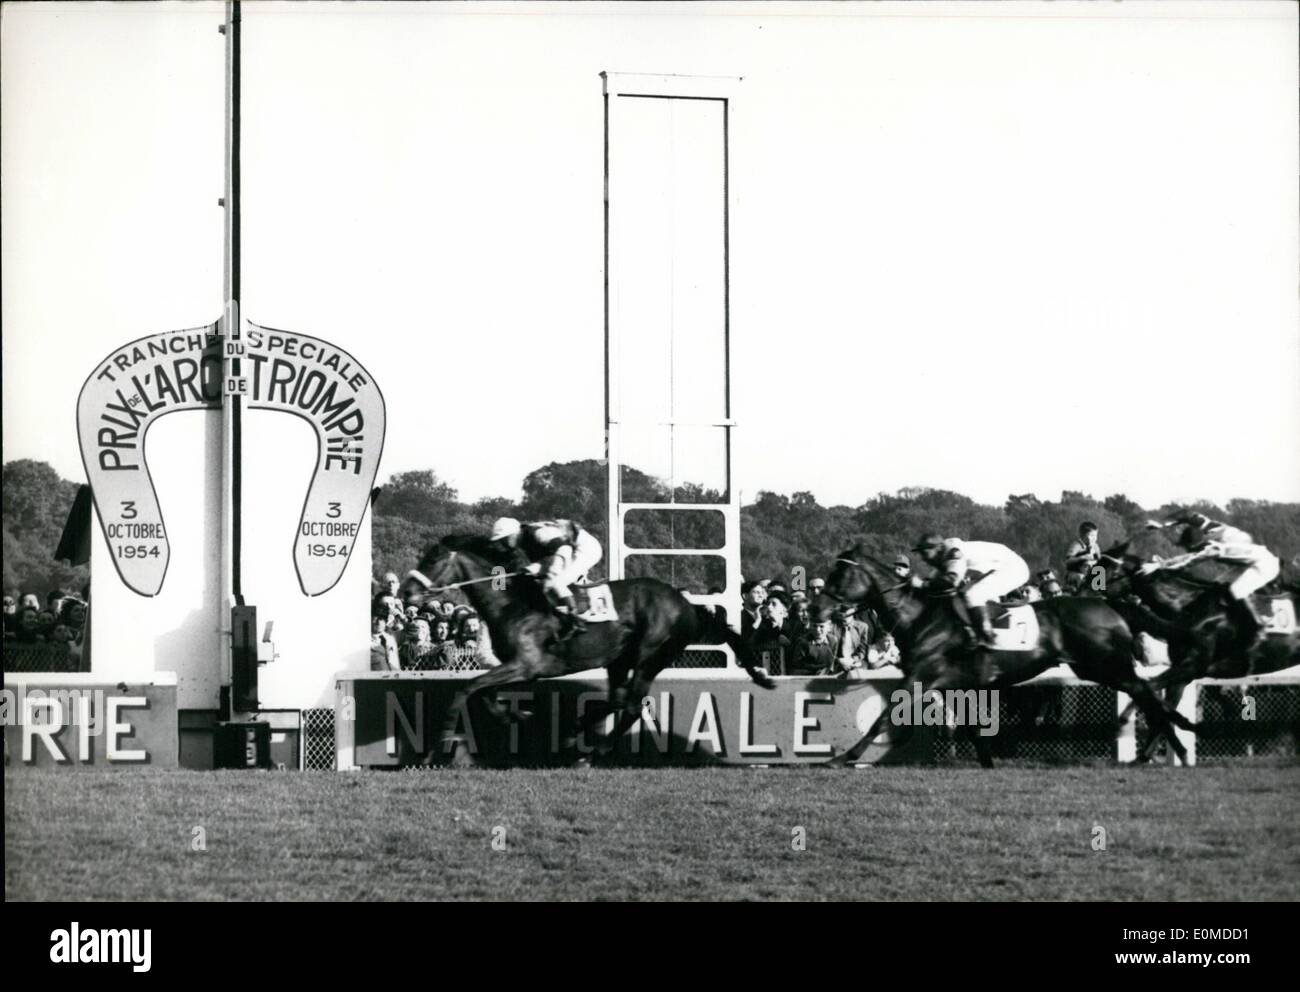 Oct. 10, 1954 - Arc de Triomphe-Biggest Sweepstake and Racing event of the season The finish of the race. Sica boy (Ridden by w.Johnstone) wins the race followed by Banassa and Philante. Stock Photo